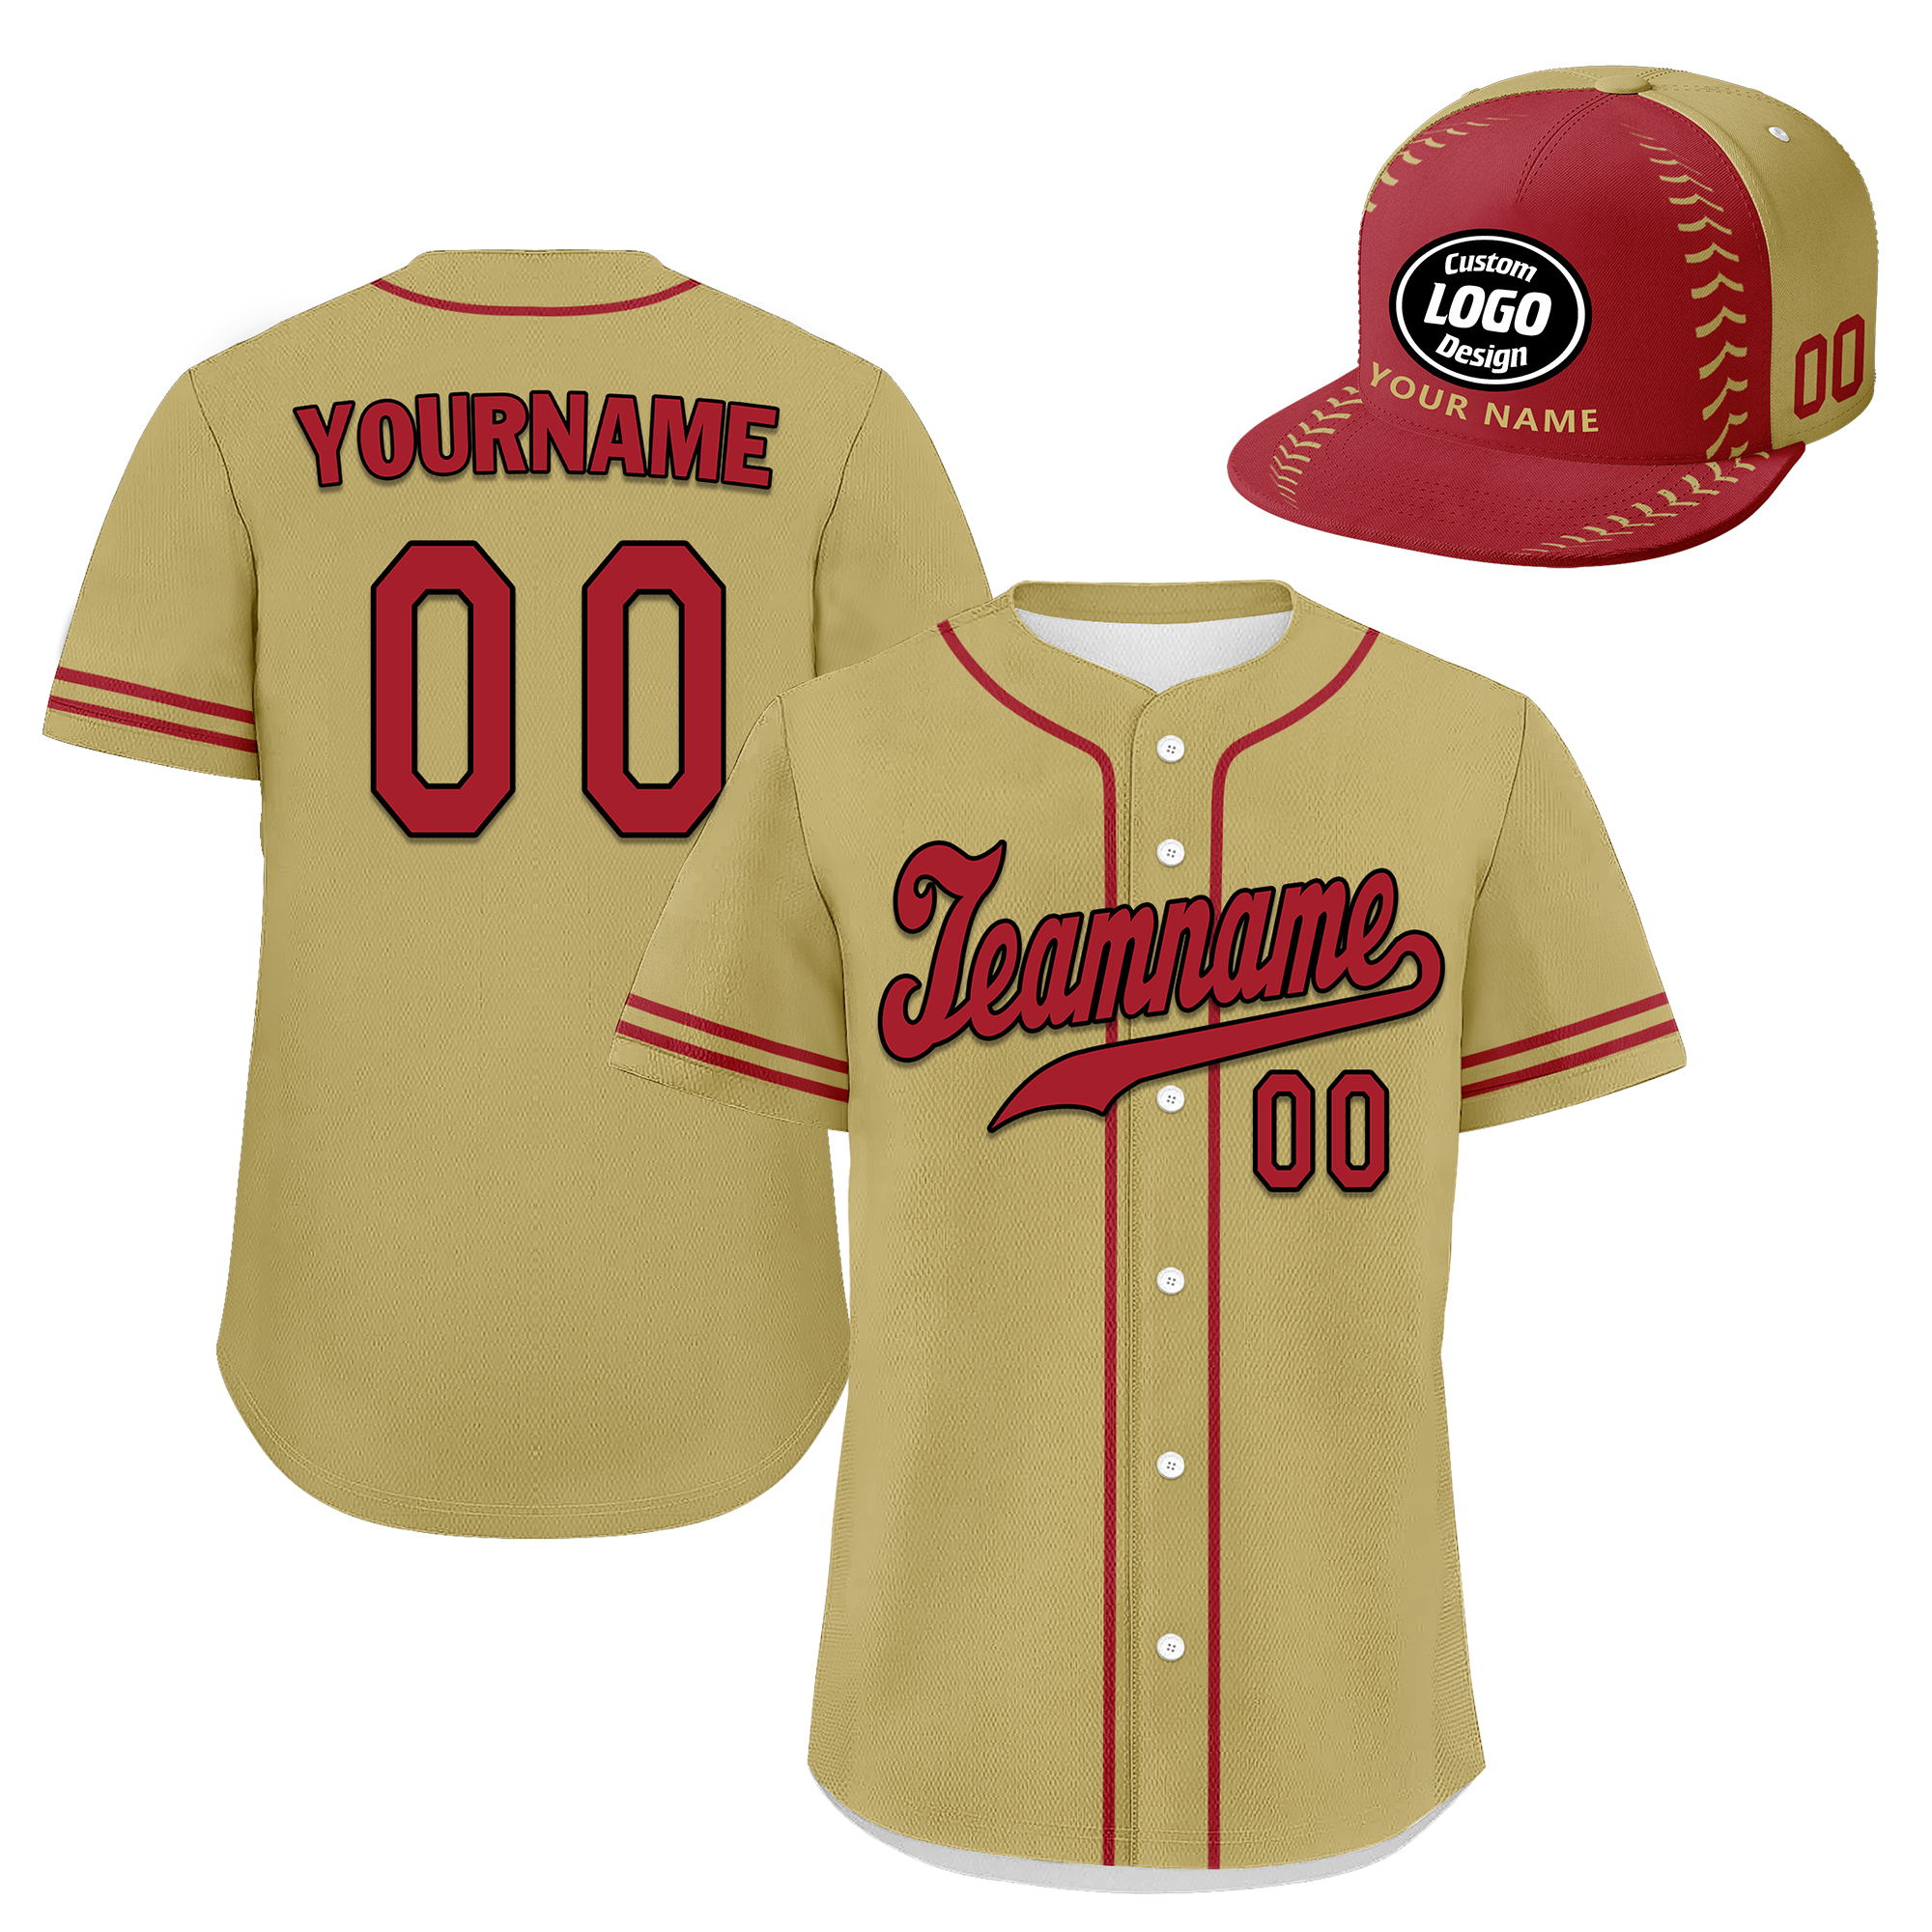 custom-baseball-uniform-hat-kits-personalized-design-printed-logo-picture-photo-on-baseball-jerseys-for-men-and-women-camel-red-ZH-24020053-7